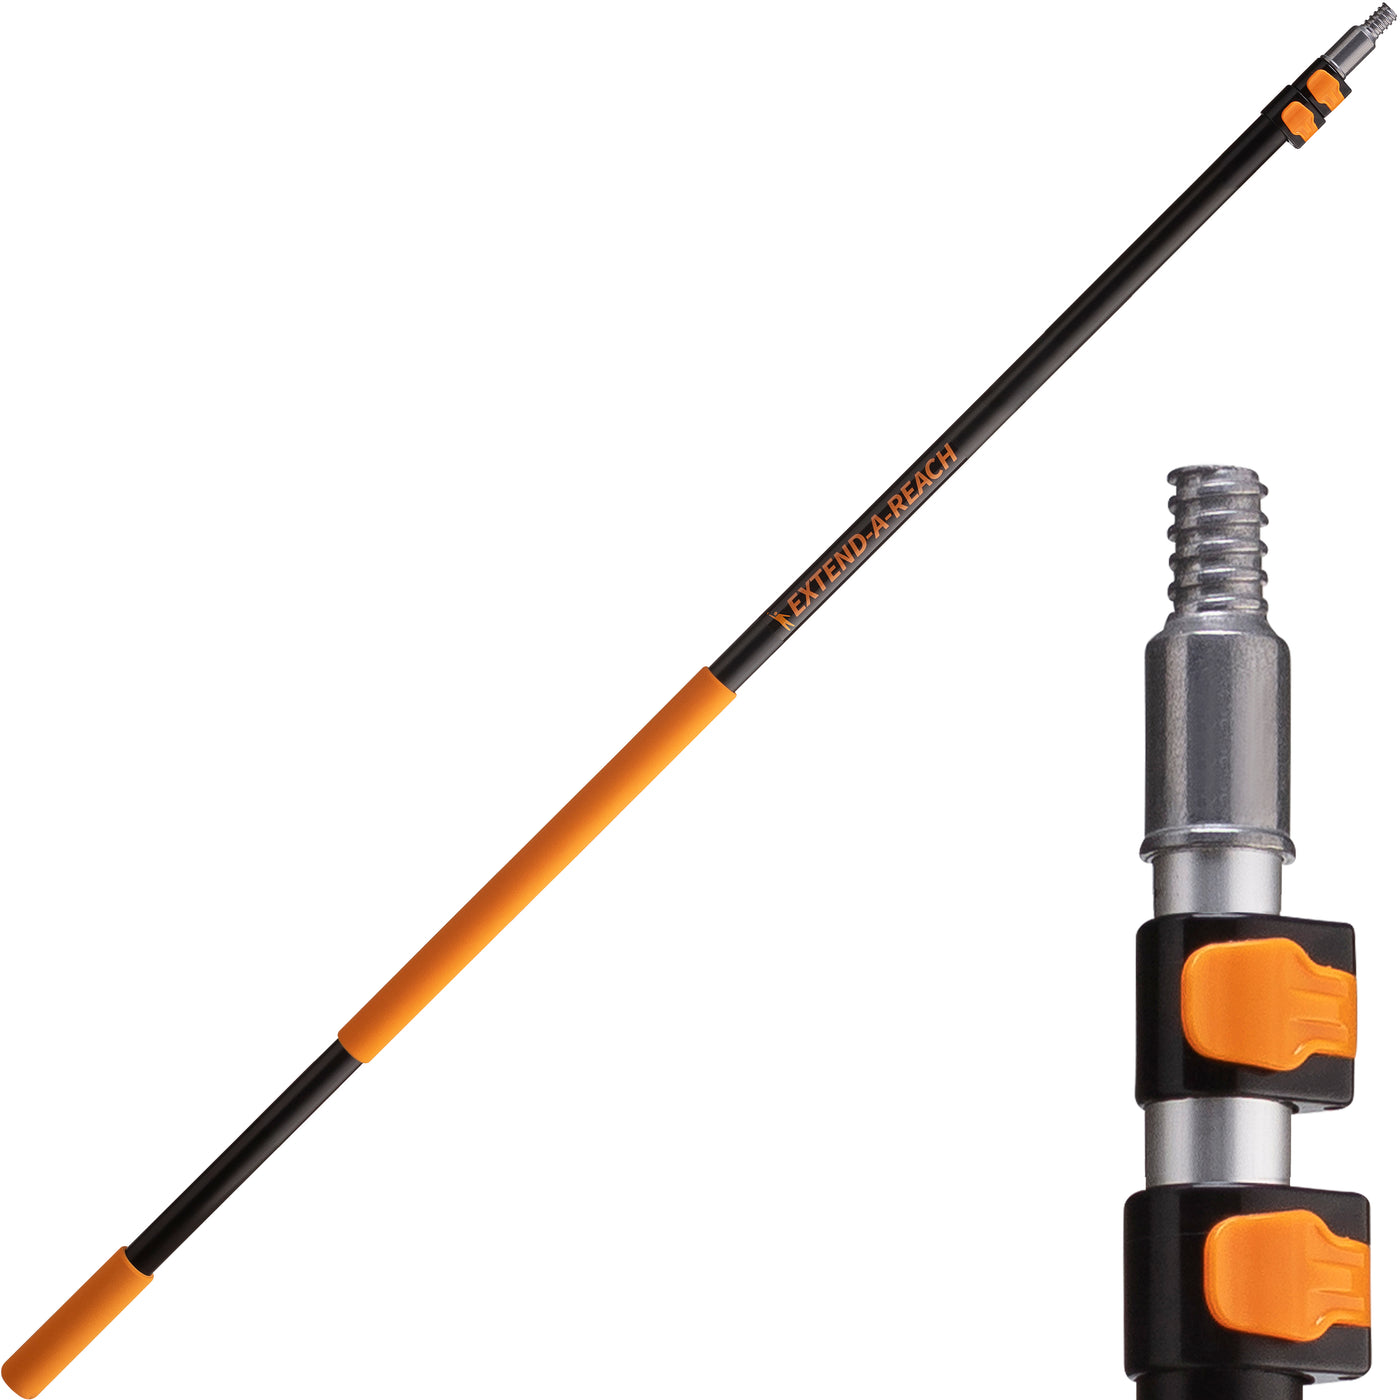 7-18 ft Long Telescopic Extension Pole with Universal Twist-on Metal Tip